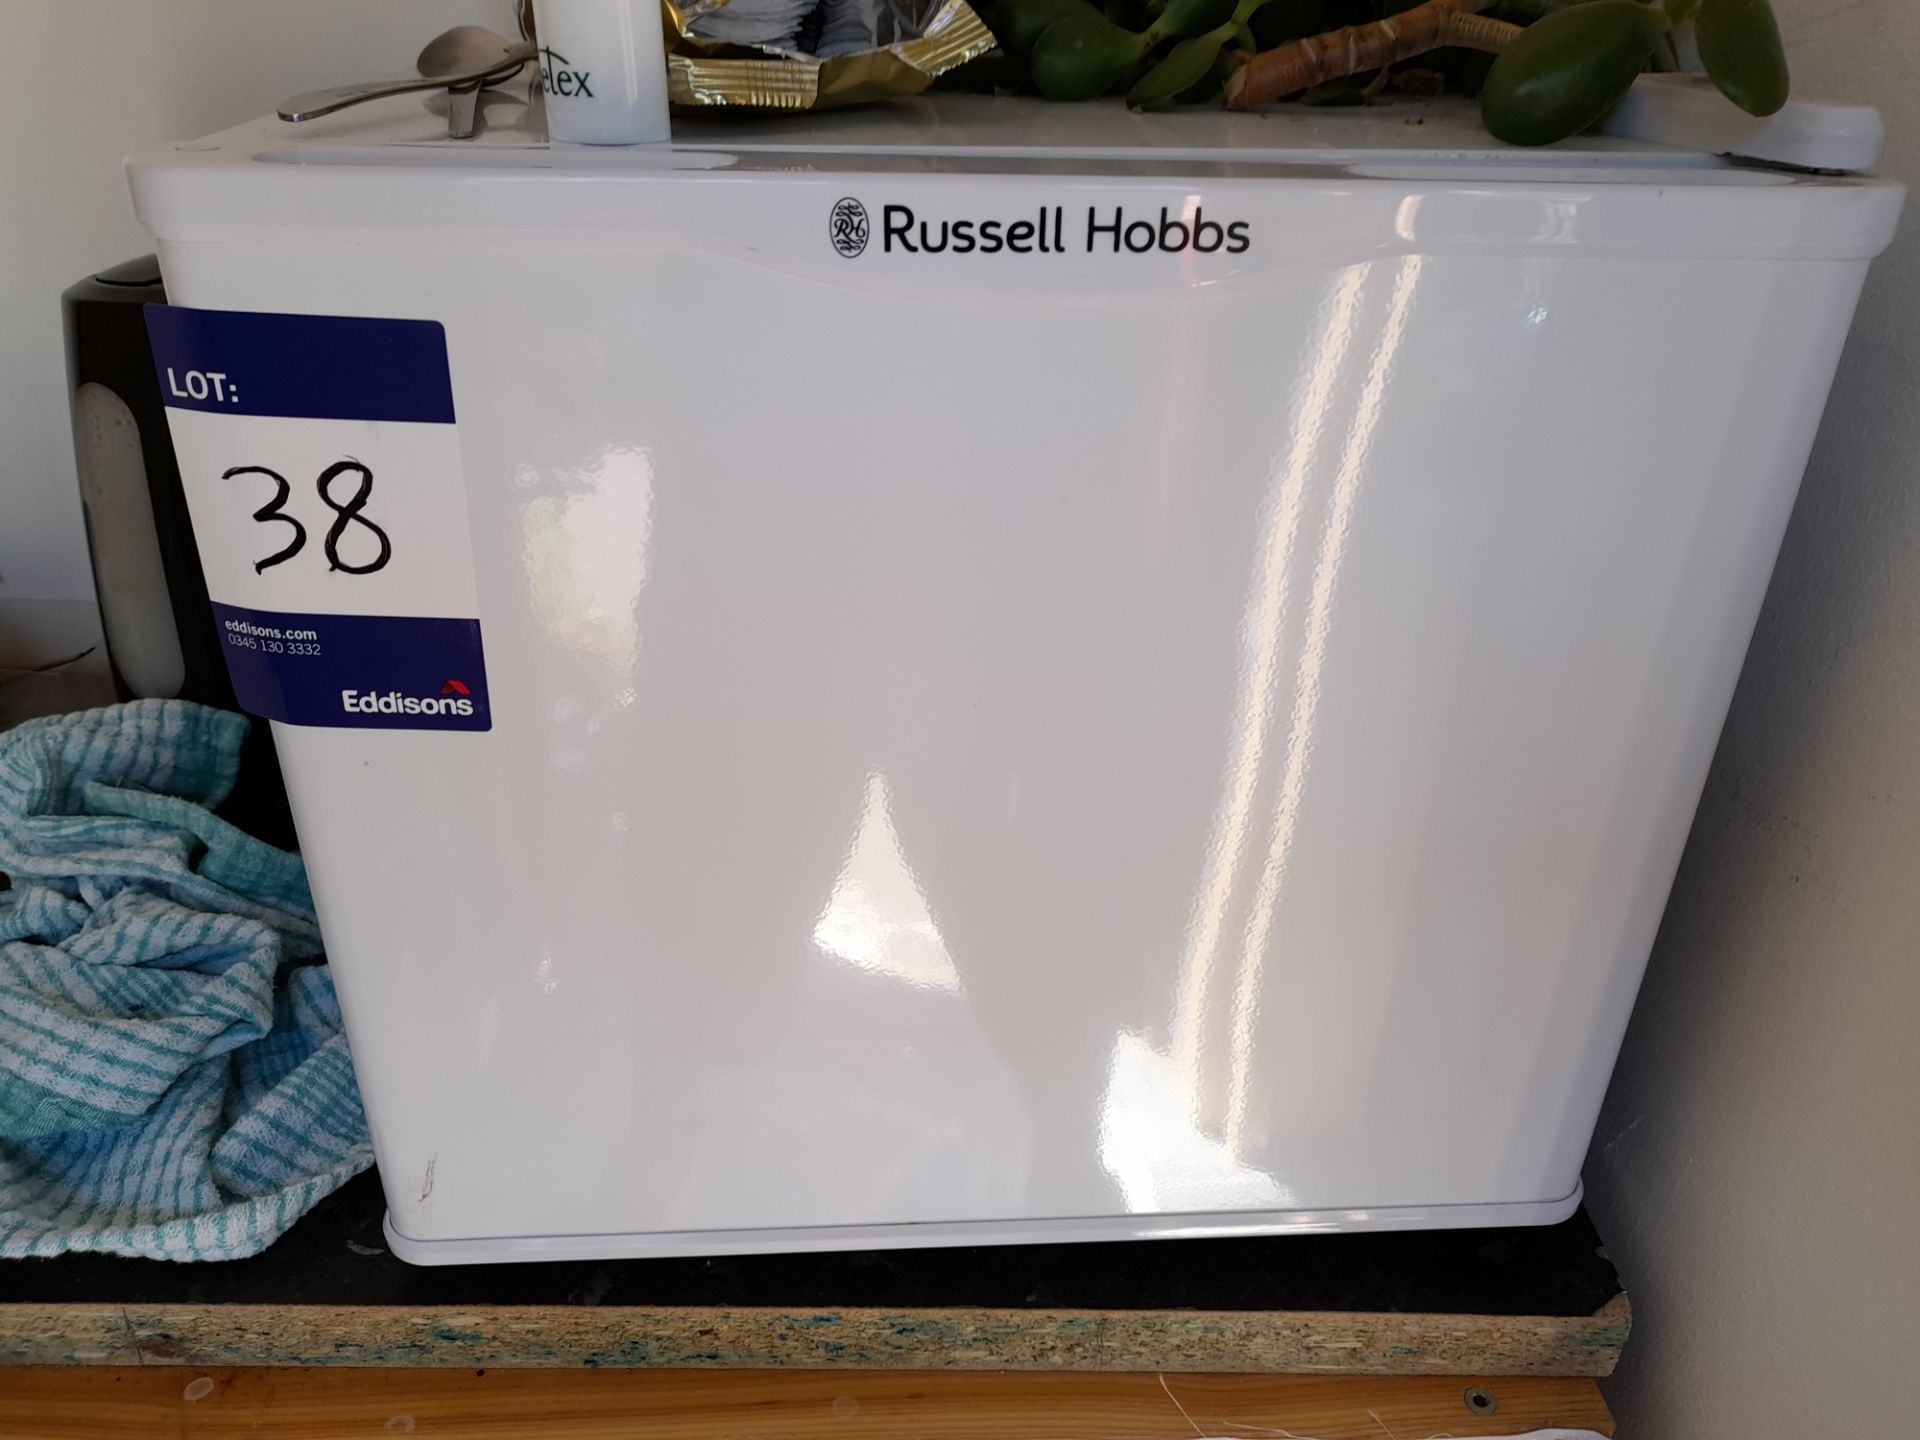 Russell Hobbs refrigerator, and unbadged microwave